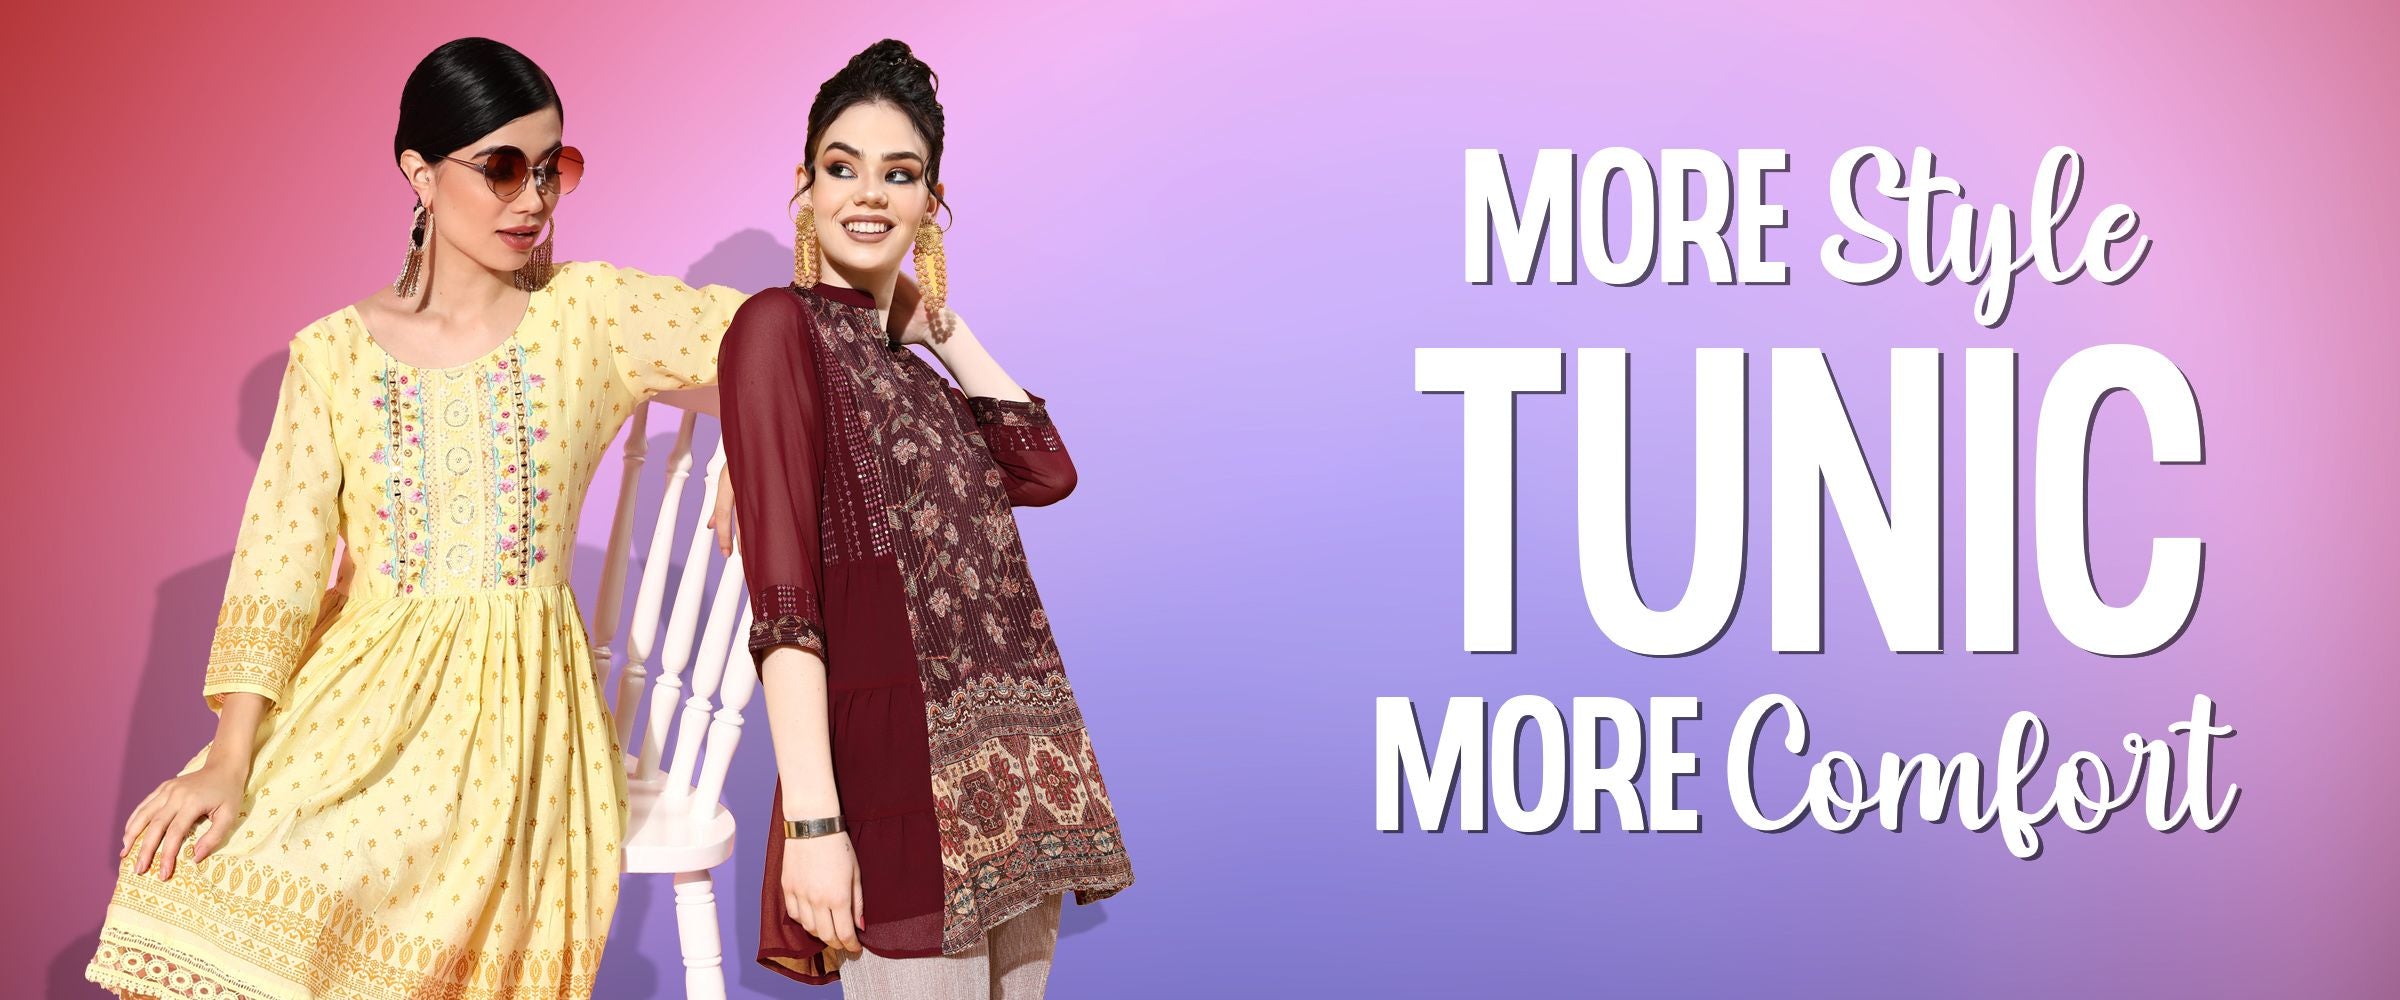 Quirky Short Kurtis for Women with Curves